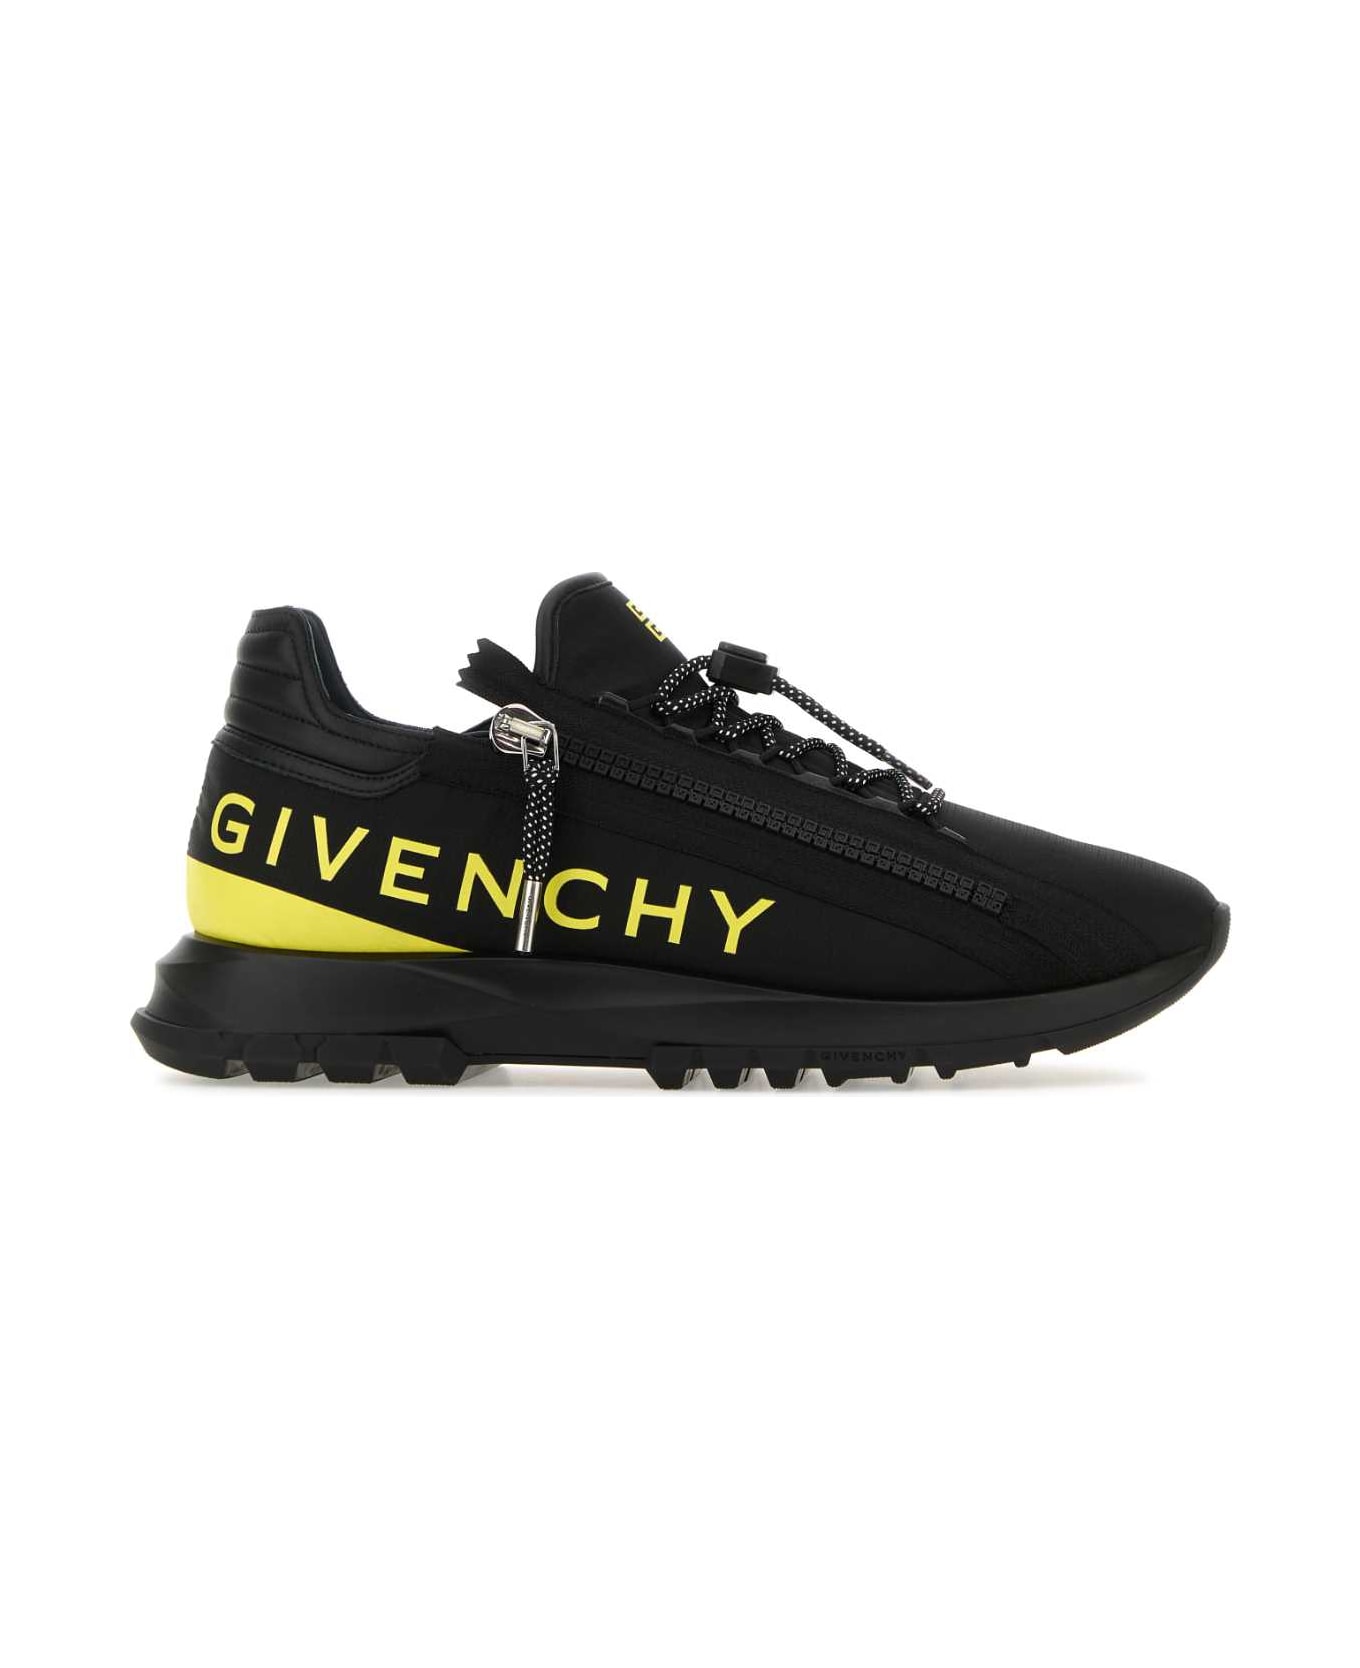 Givenchy Black Fabric Spectre Sneakers - BLACKYELLOW